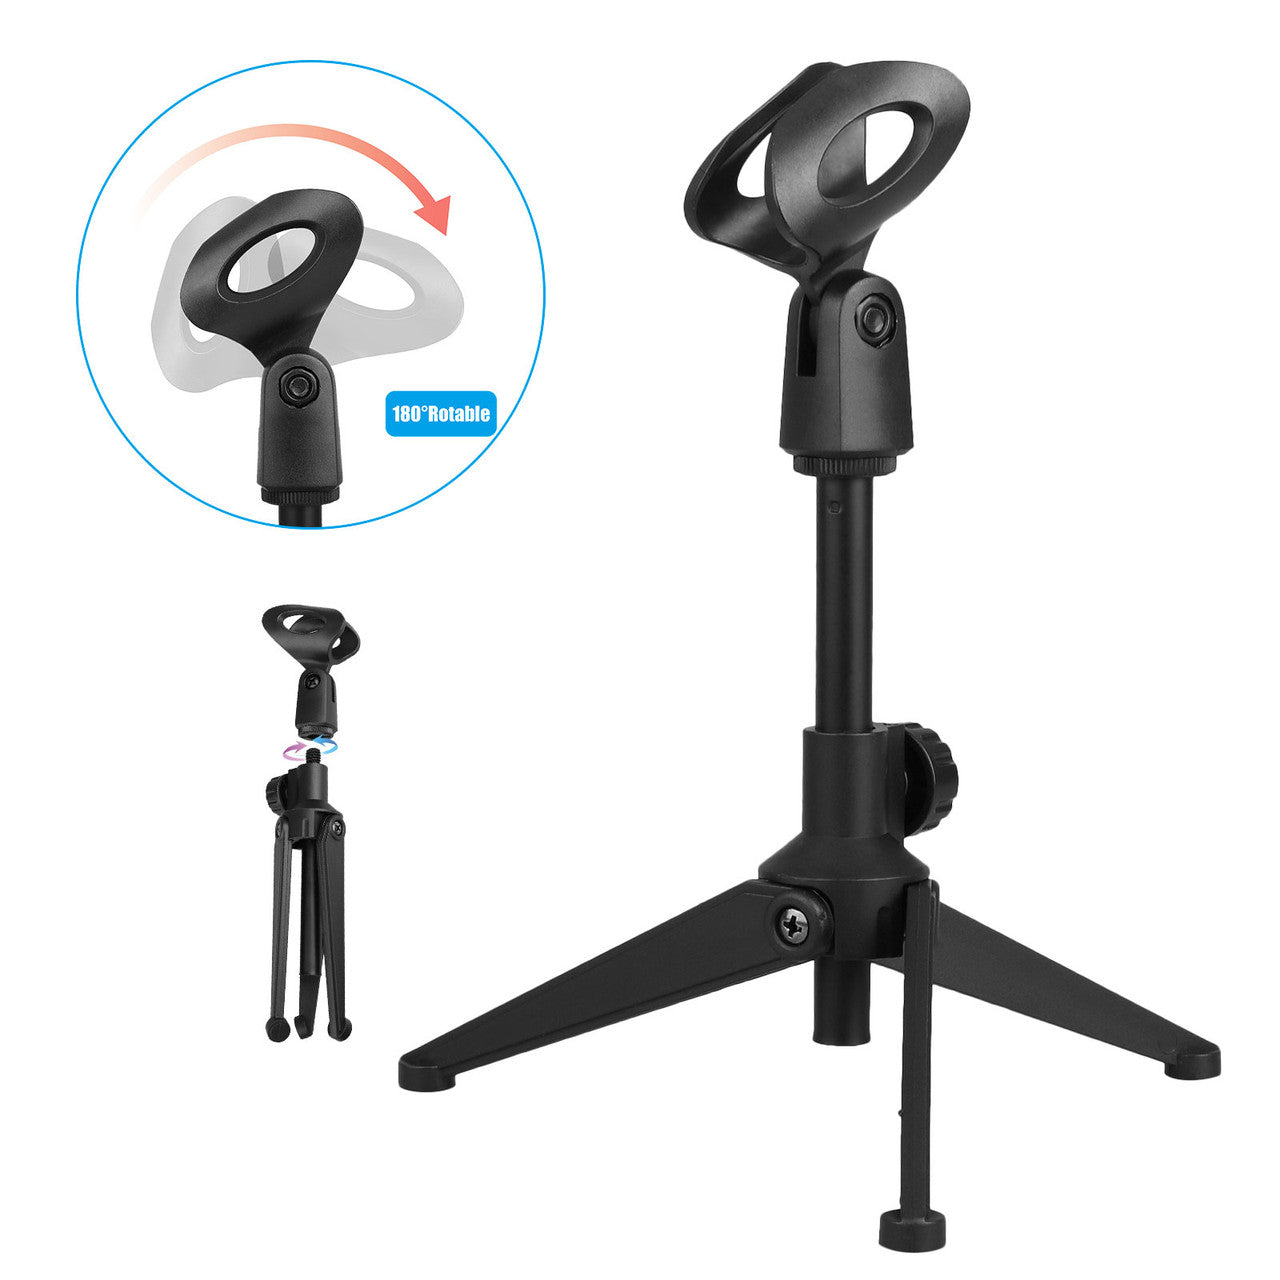 Tripod Desktop Microphone Stand Holder, Lightweight Stable Collapsible Desktop Microphone Stand,Adjustable Height 7.08 to 9.45 inches, for Lectures,meetings,Online Chat